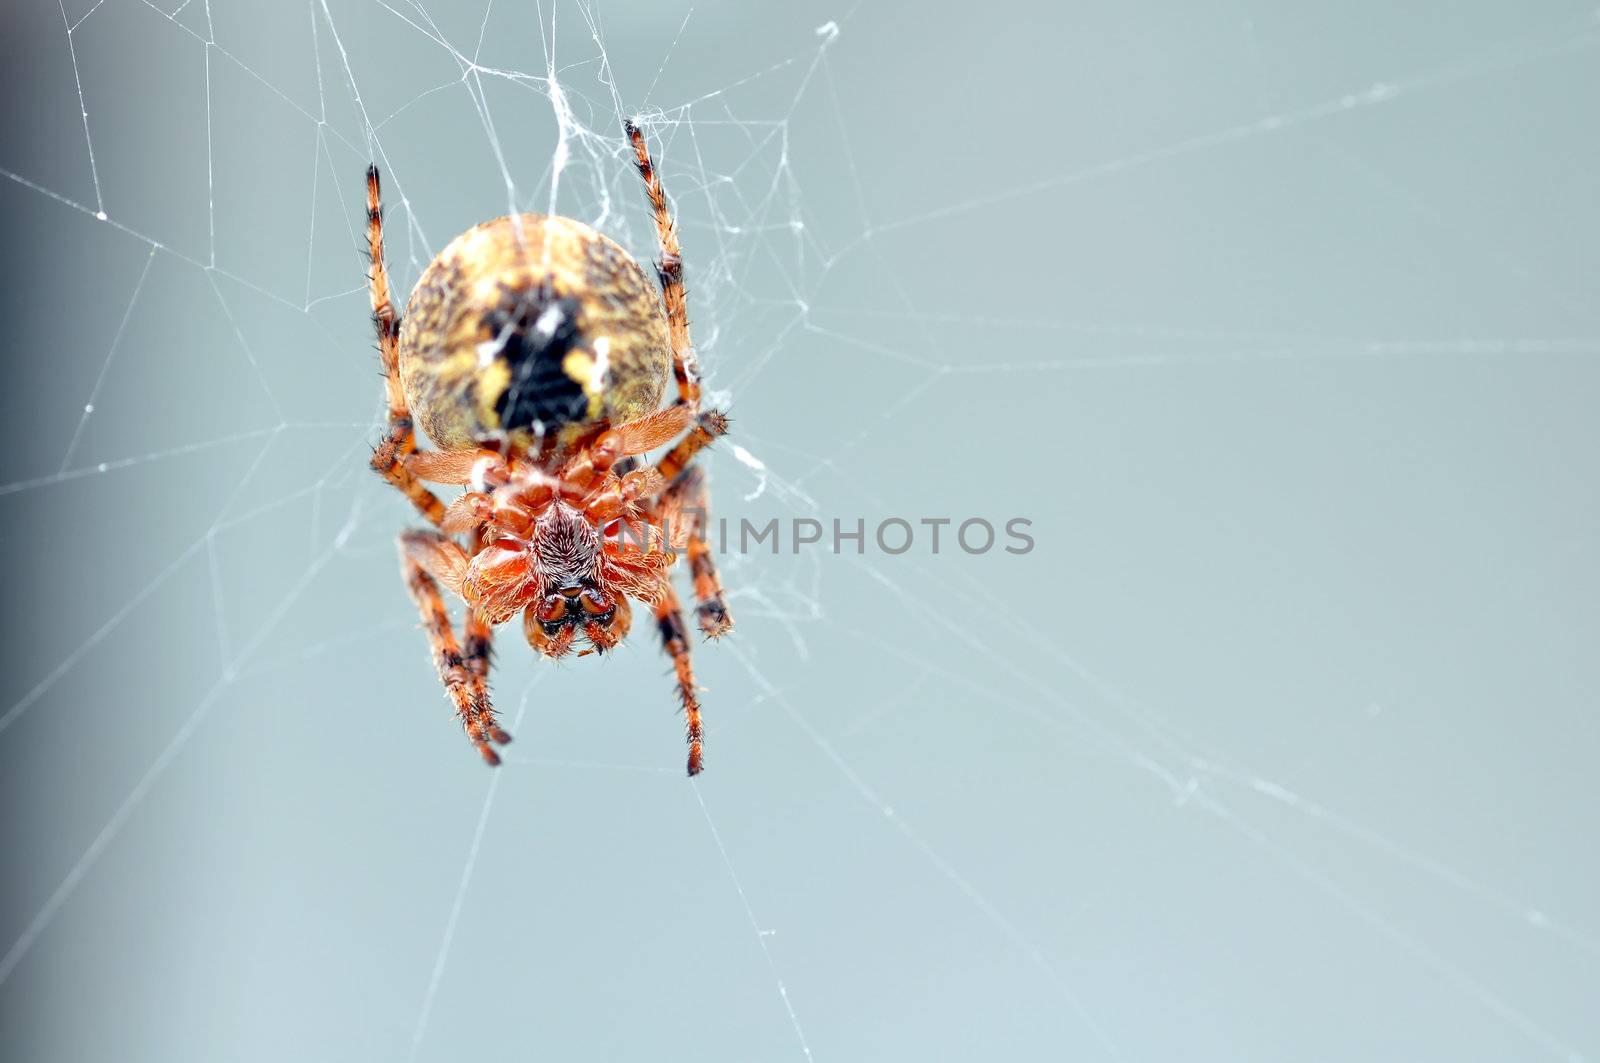 Looking under a garden spider, orb weaver, resting on its web on a grey background, great details of the hairs.